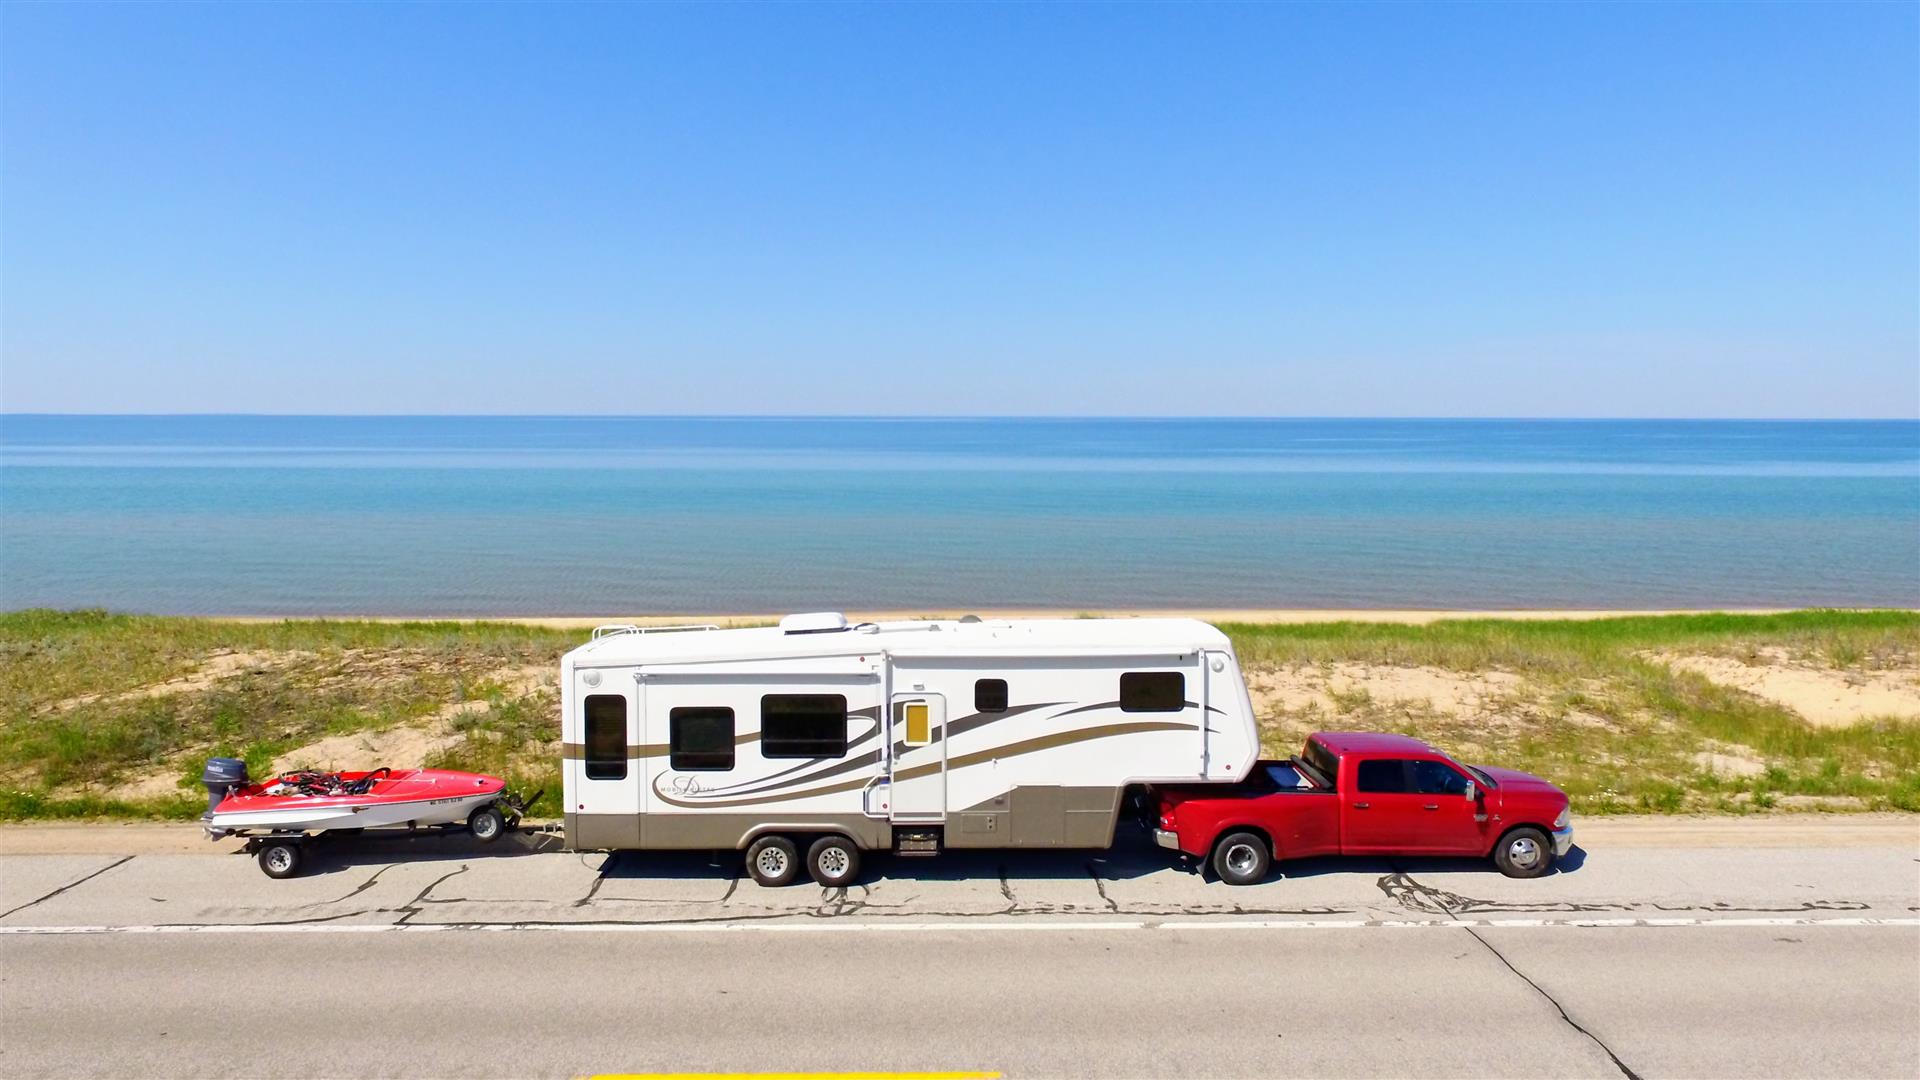 Triple towing a boat behind a fifth wheel